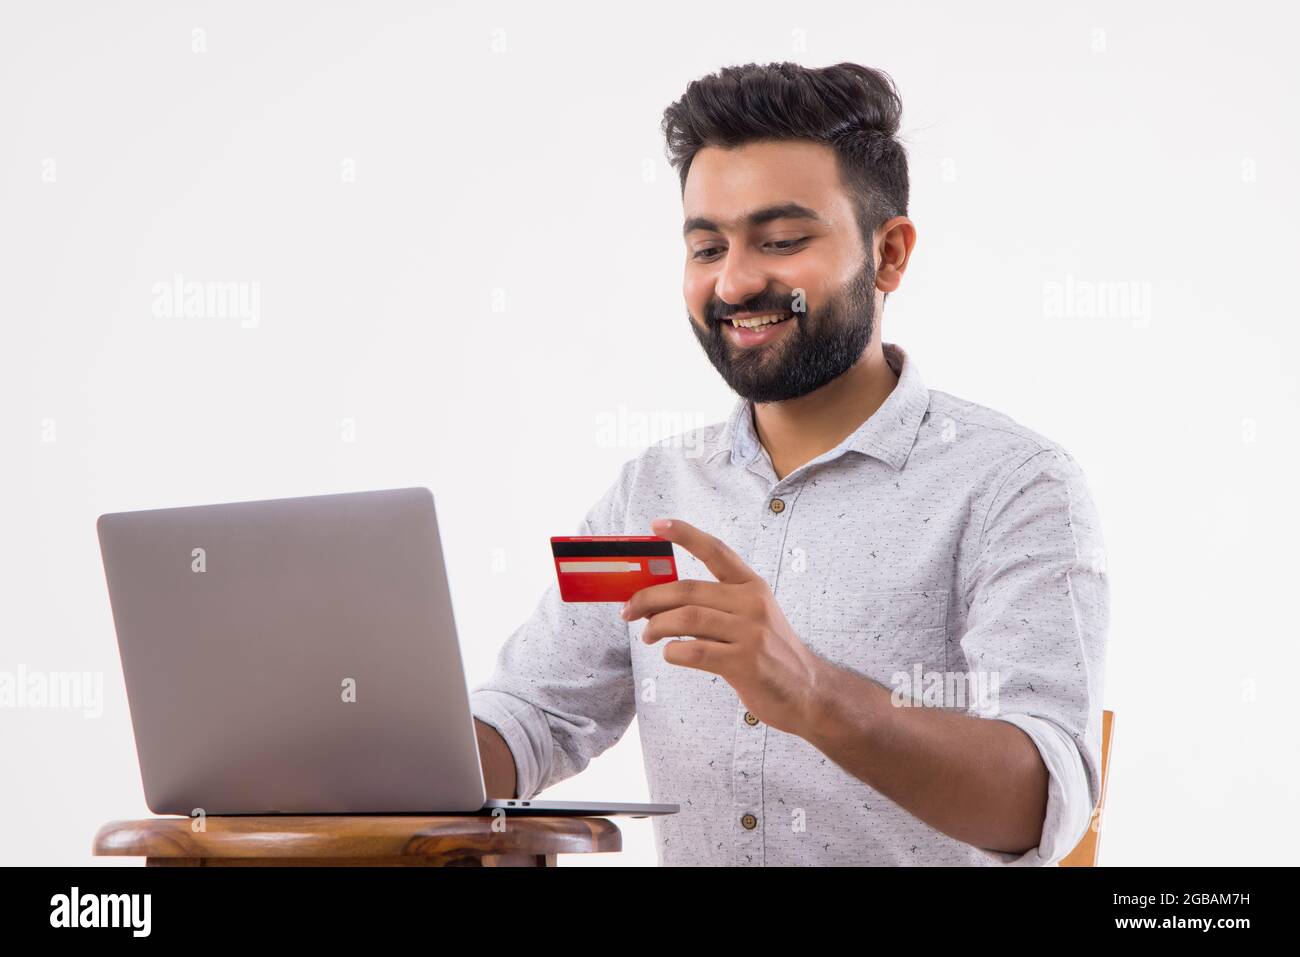 A BEARDED MAN HAPPILY DOING ONLINE TRANSACTIONS Stock Photo